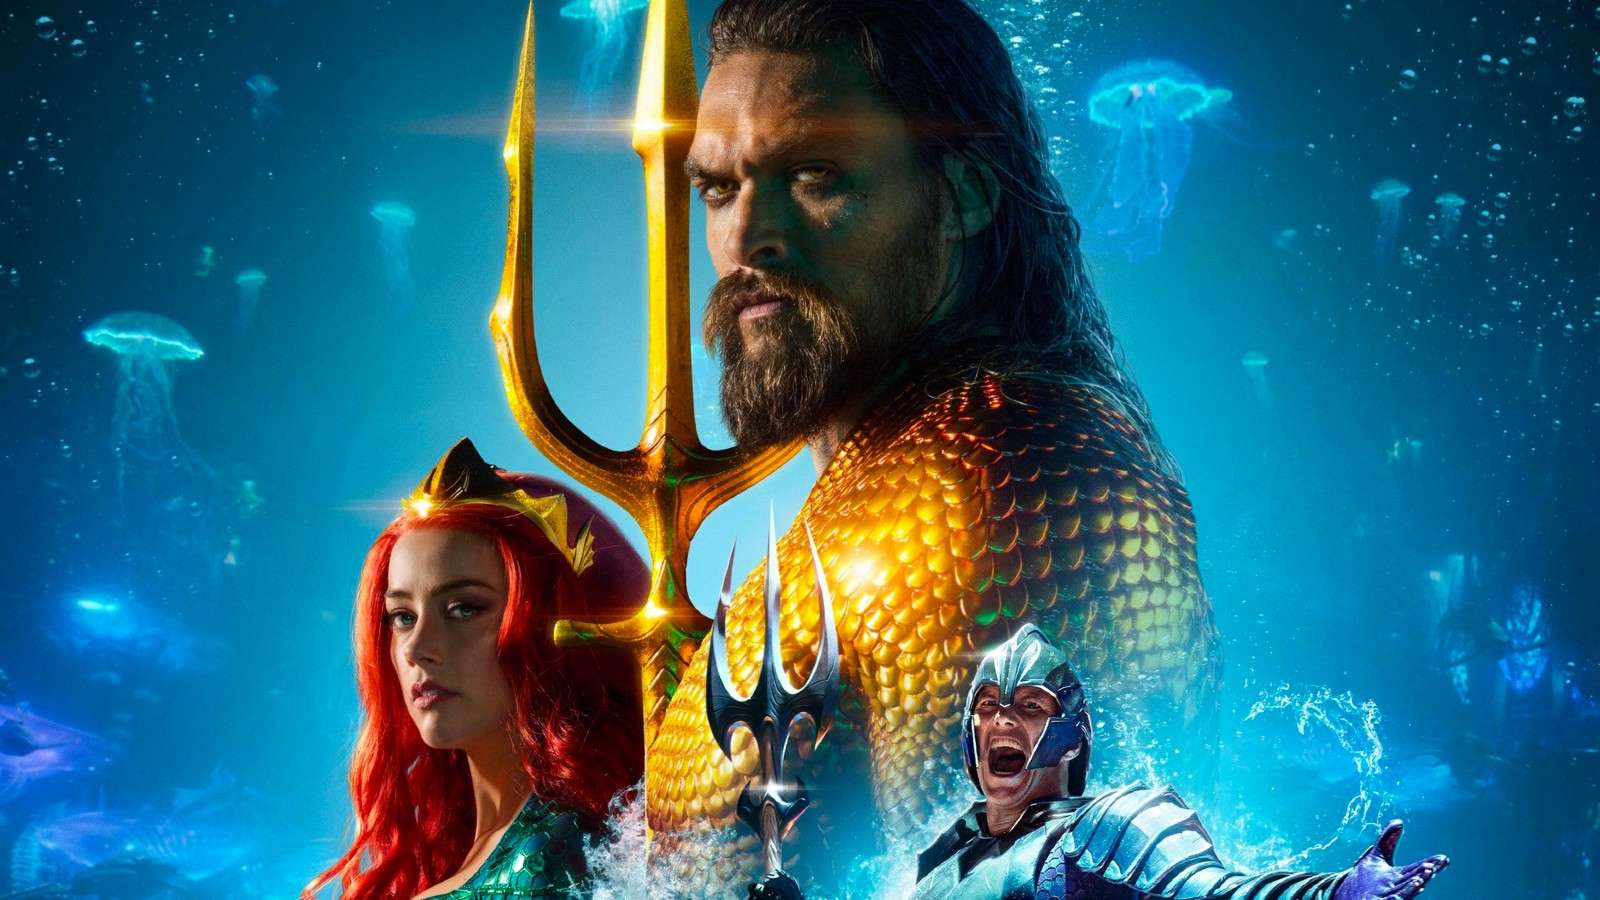 The poster for Aquaman with Jason Momoa, Amber Heard, and Patrick Wilson